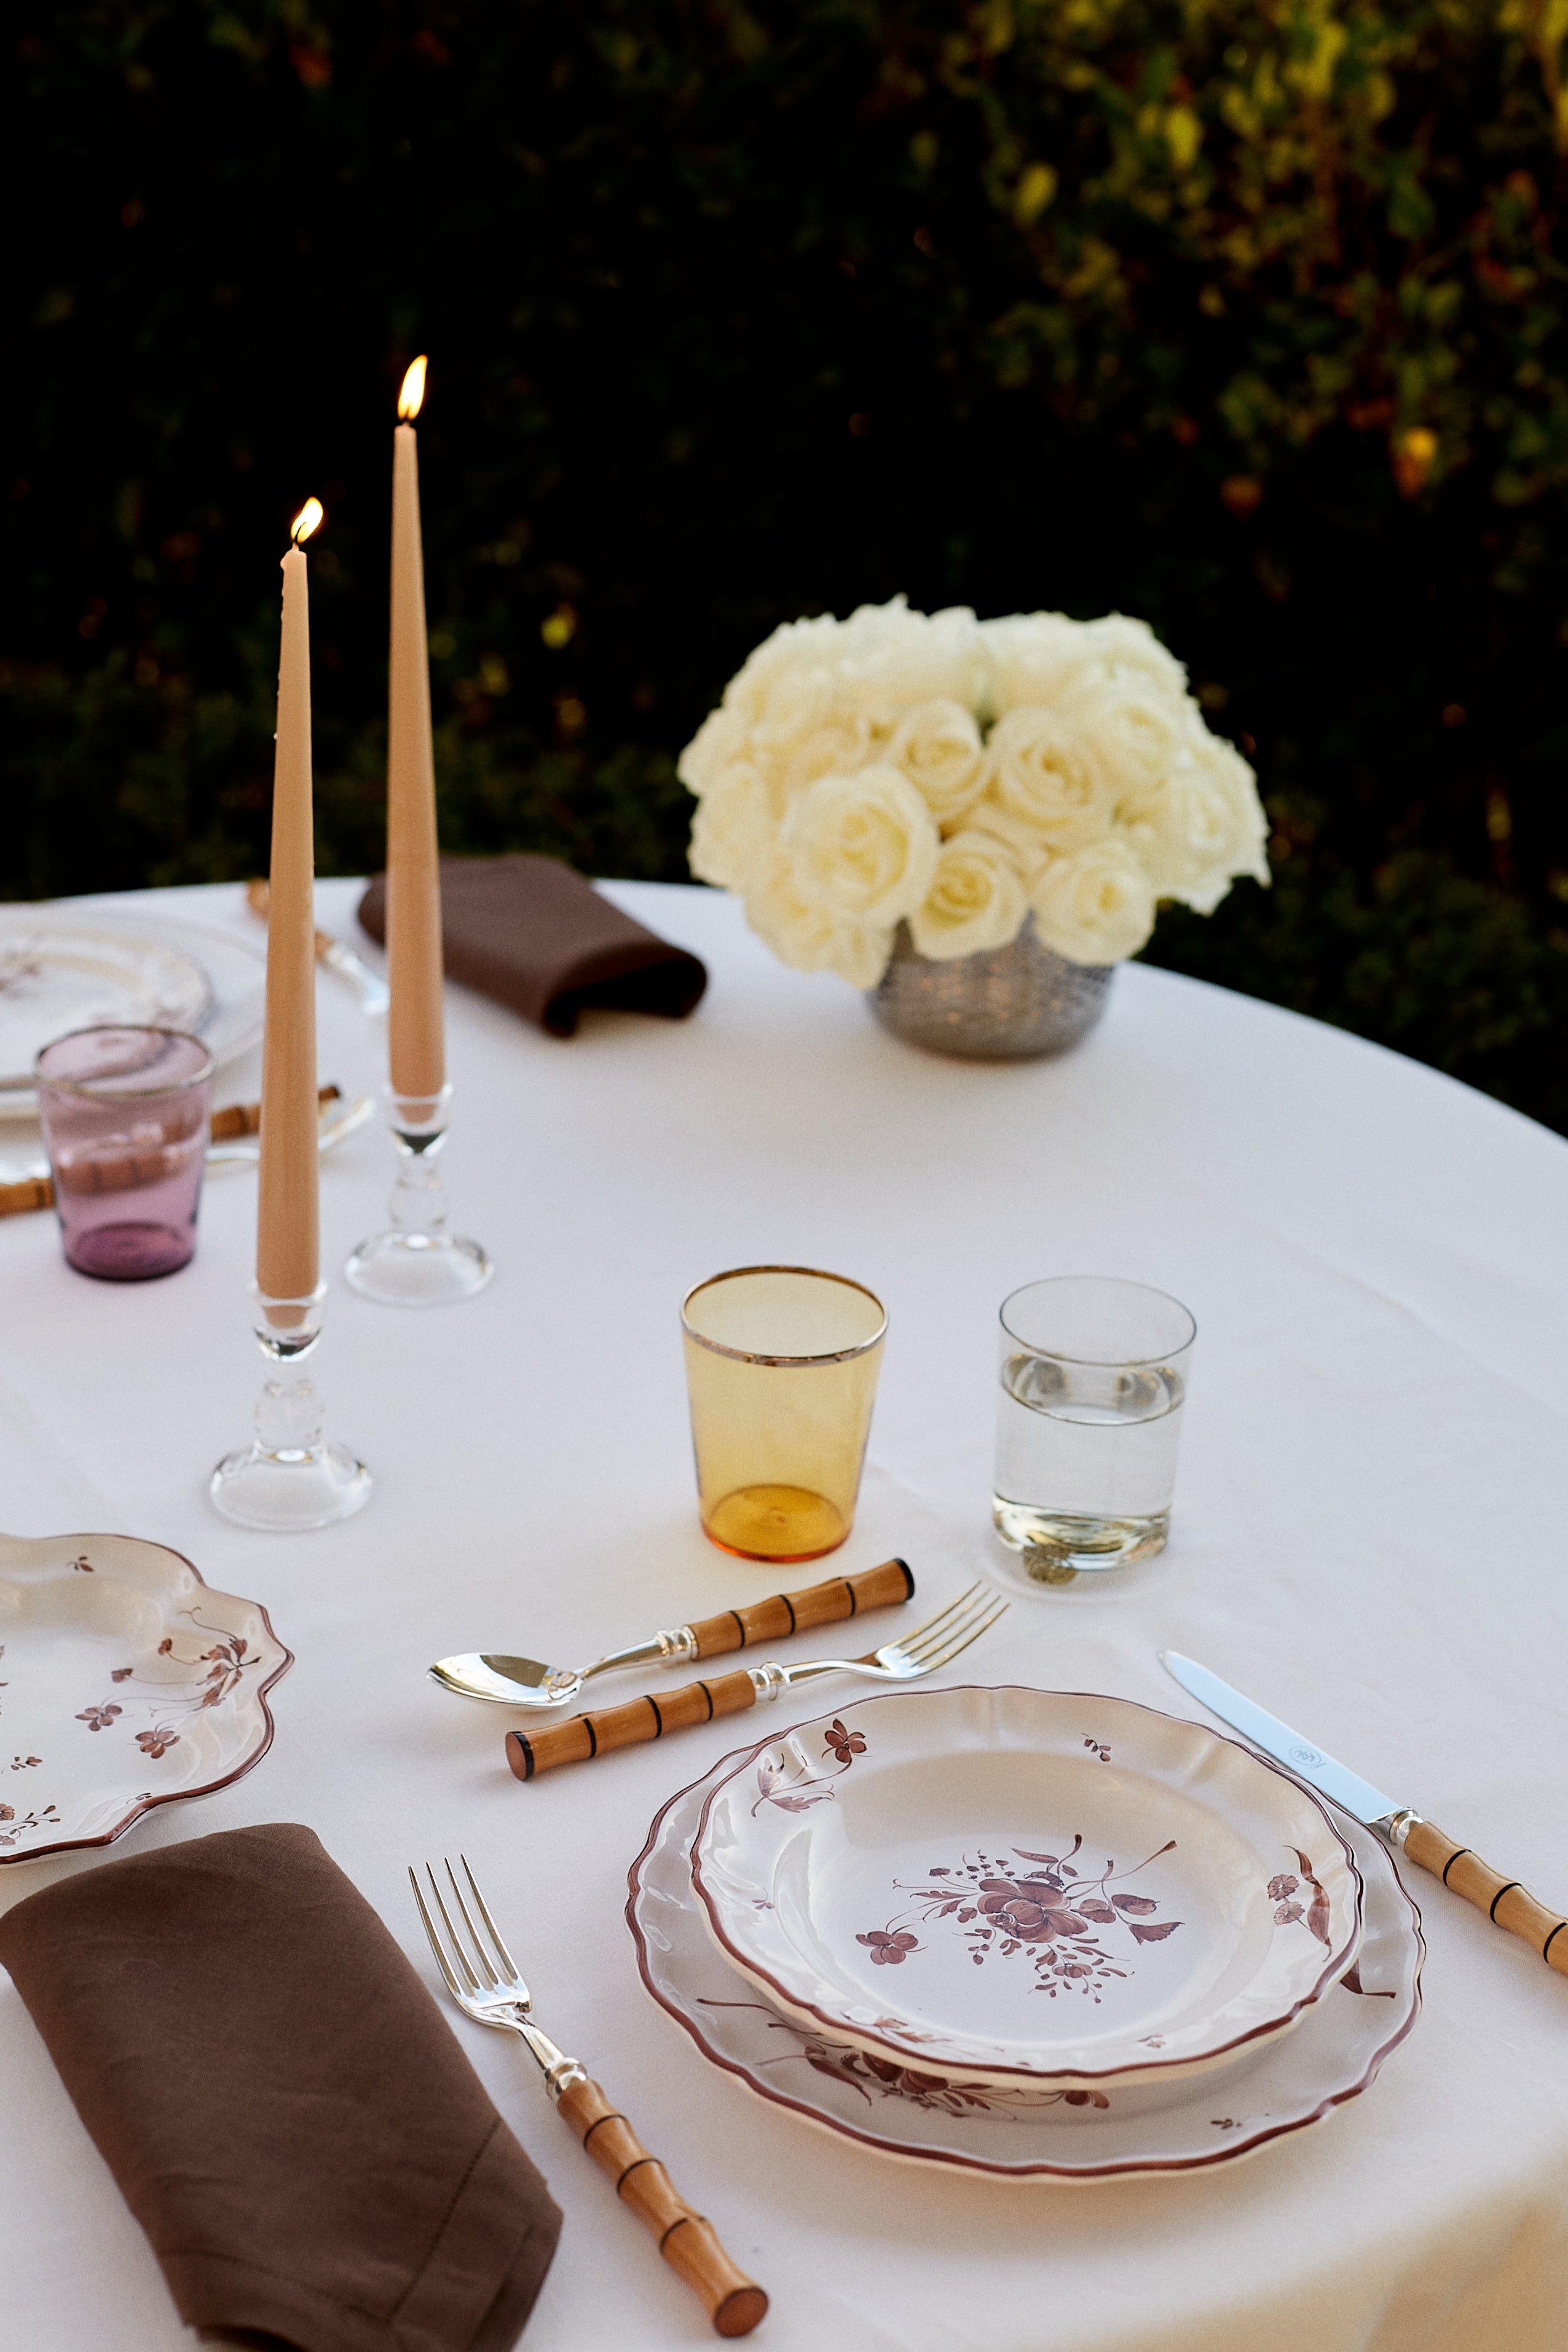 Table Setting with Small Platine Cache Pot